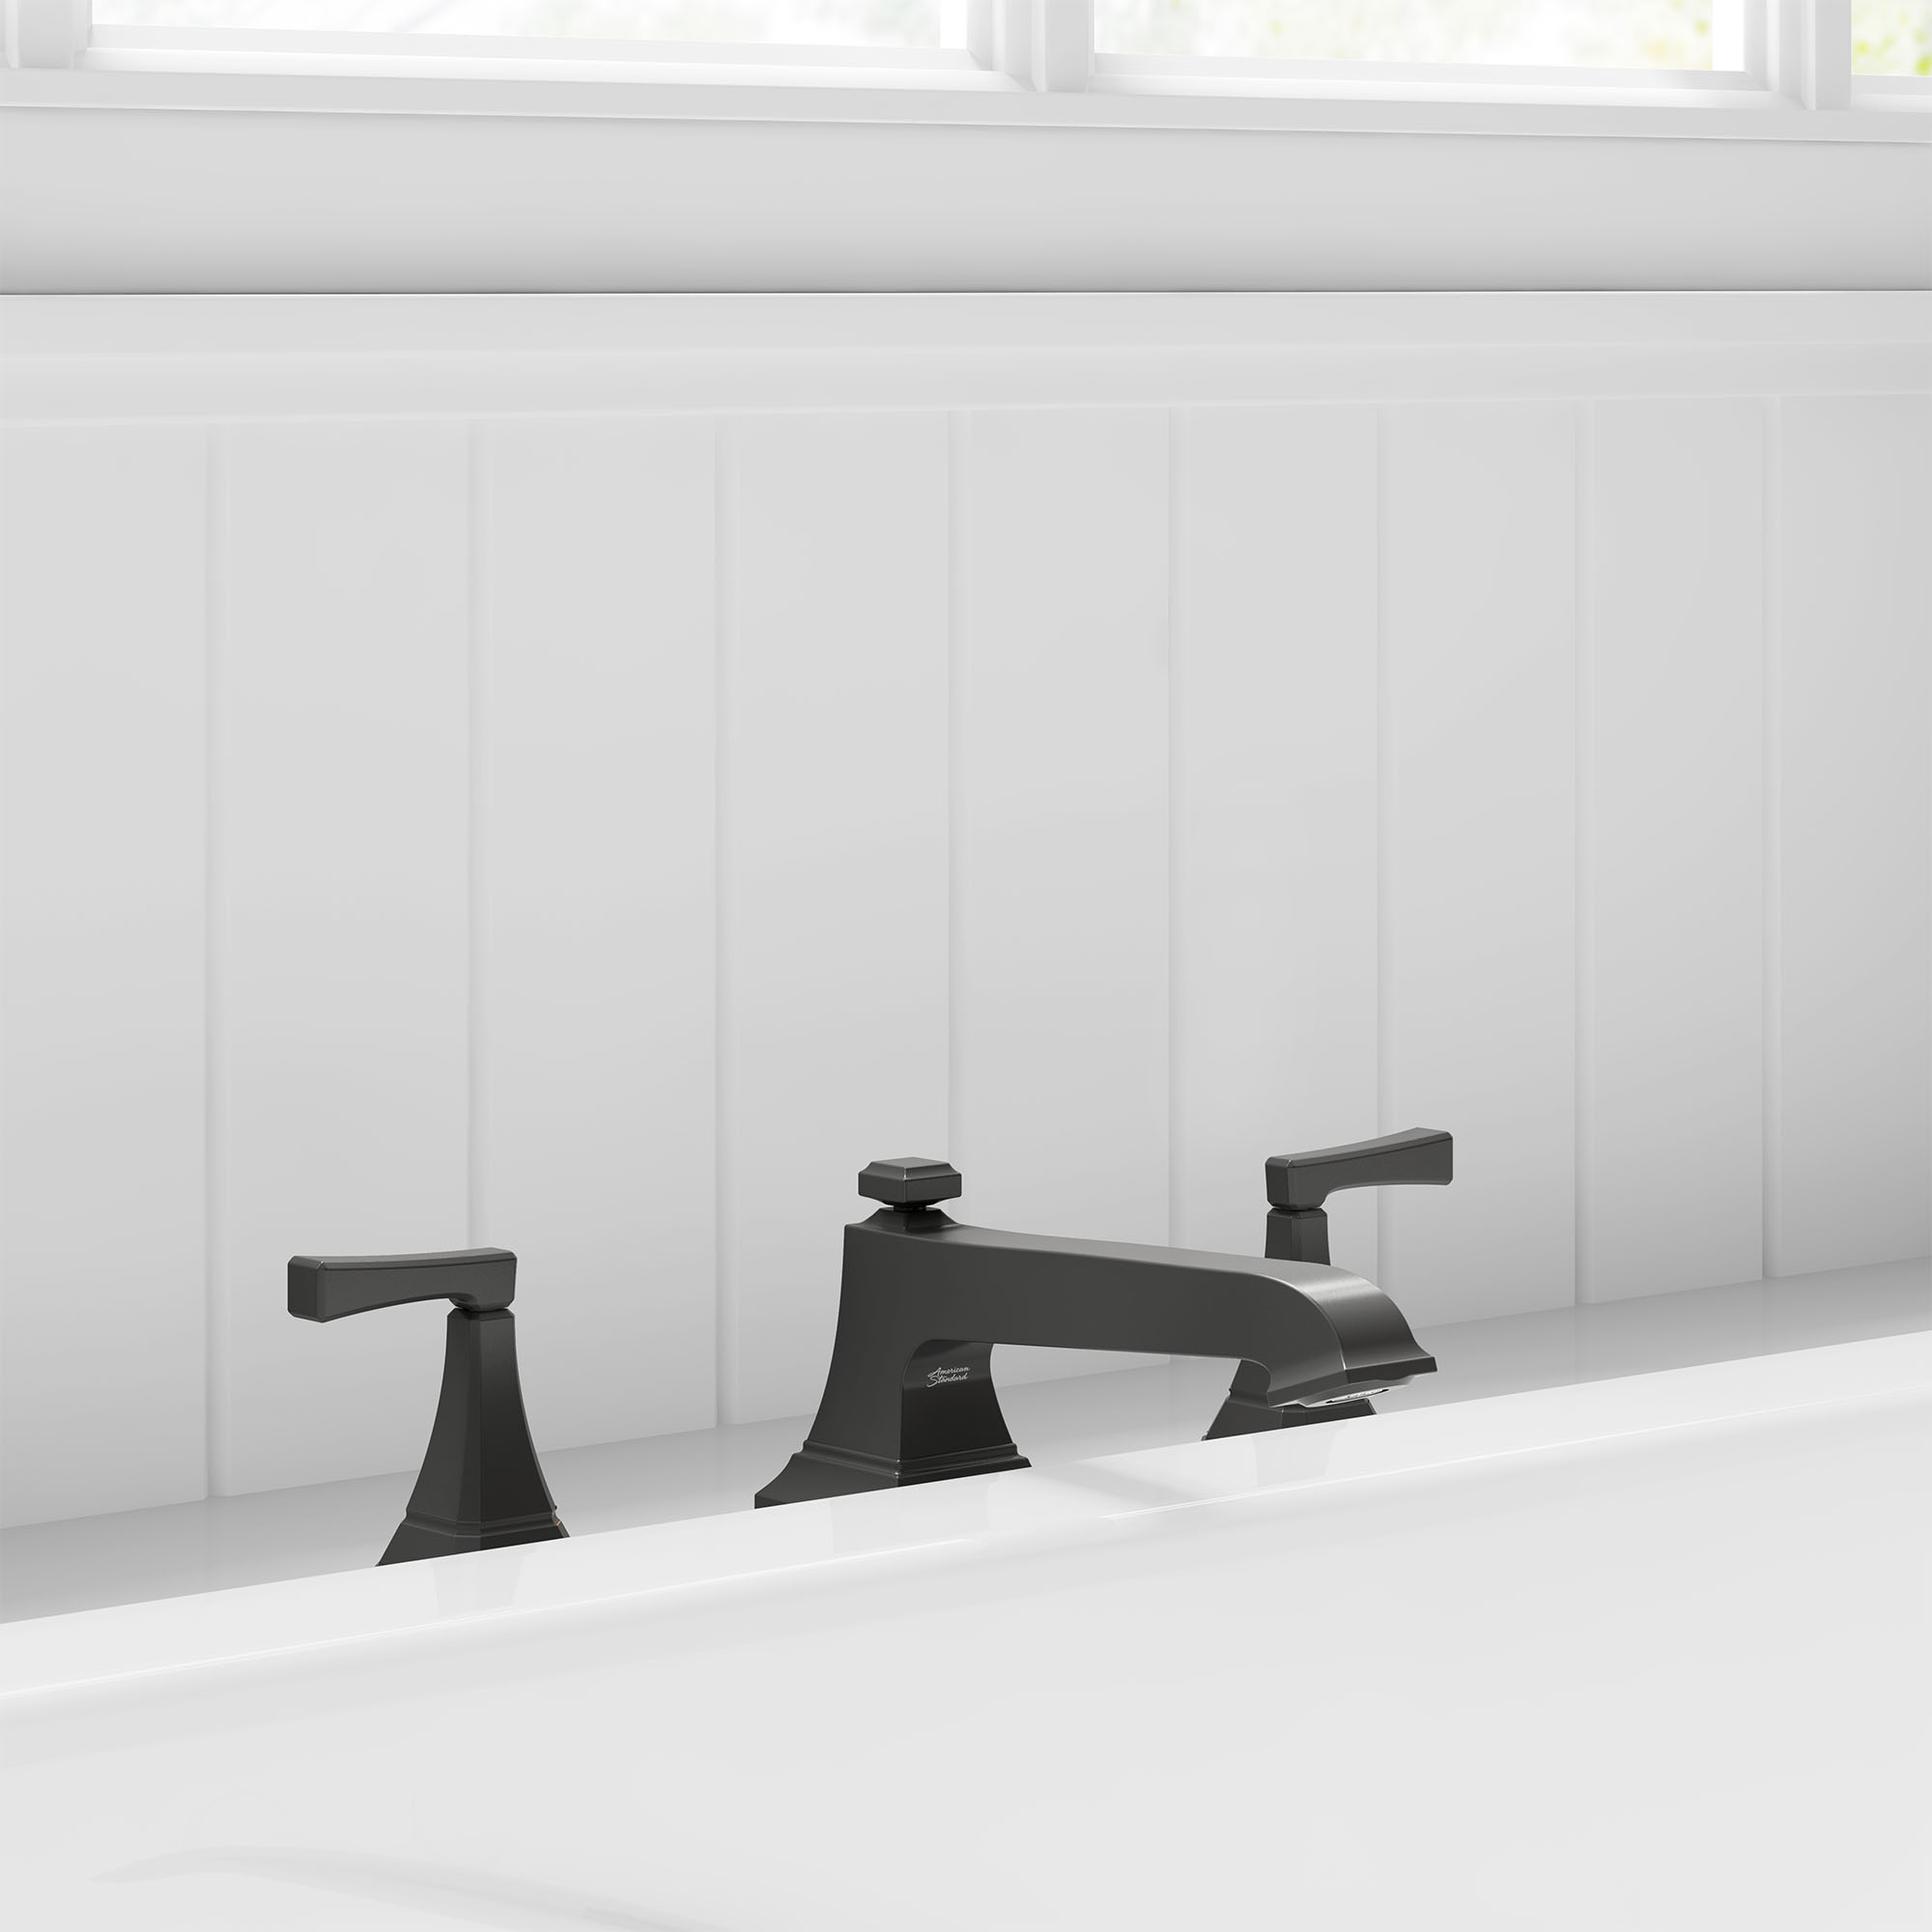 Crawford™ Bathtub Faucet With Lever Handles for Flash® Rough-In Valve